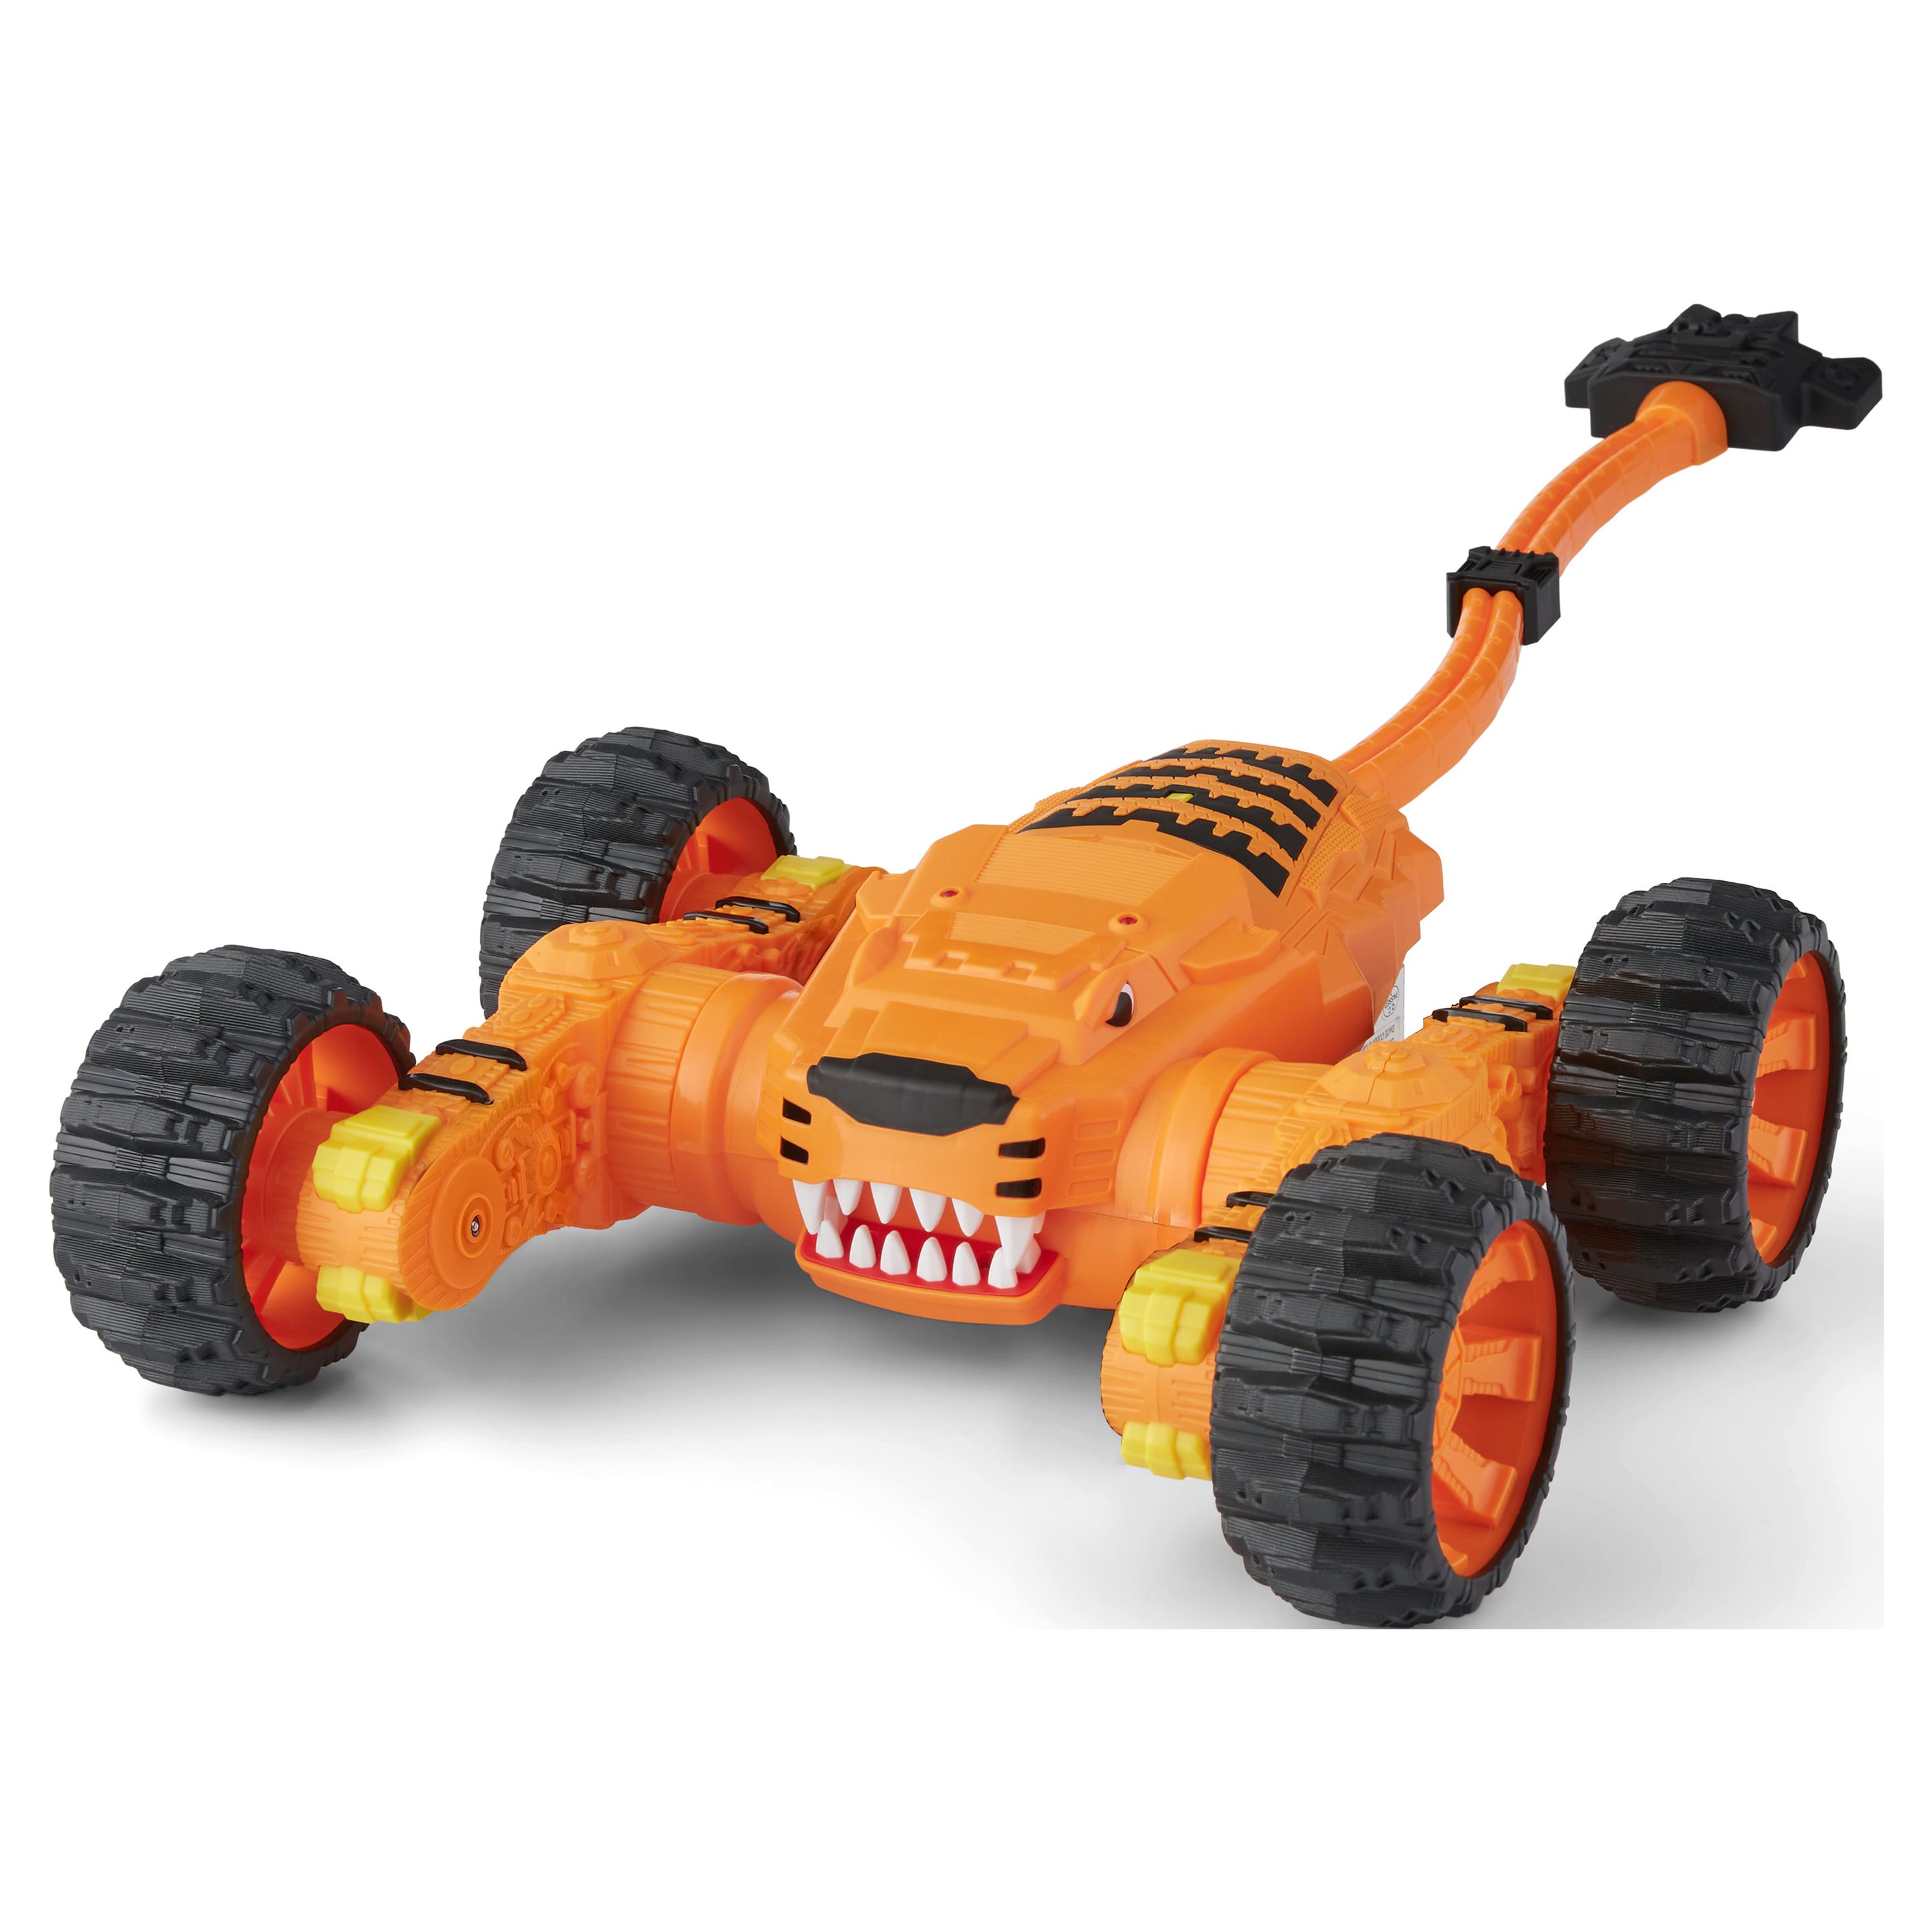 Adventure Force Tiger Twister Radio Controlled Stunt Vehicle - image 4 of 6